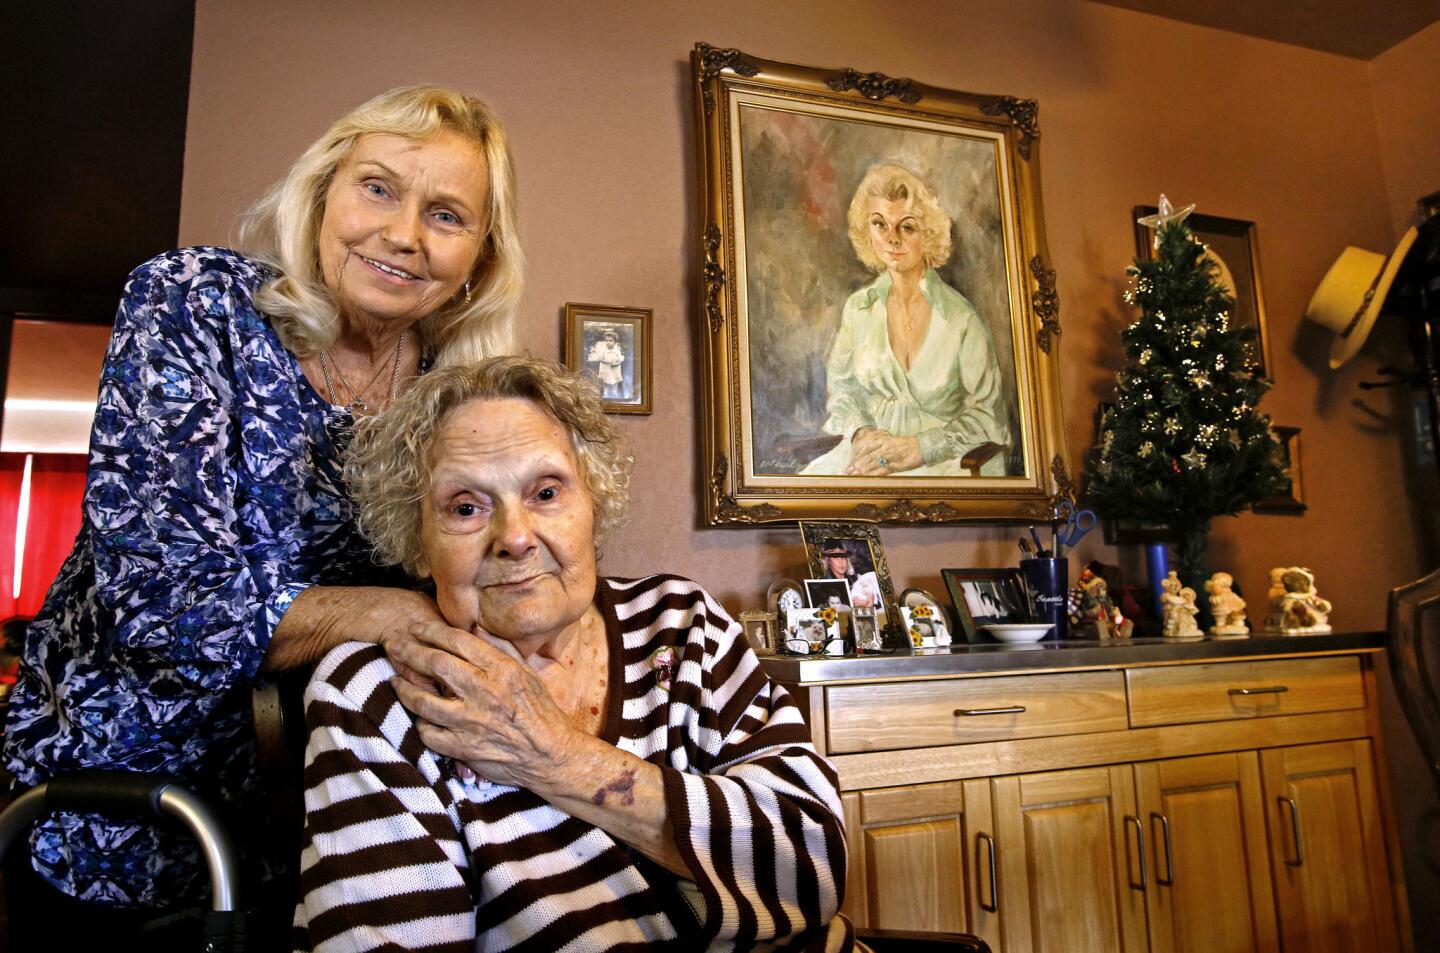 Patricia Hamlin, left, and her biological mother Brooke Mayo, are photographed at Brooke's home in Paso Robles. Patricia looks uncannily like a painting of Brooke that was done in the 1970s.